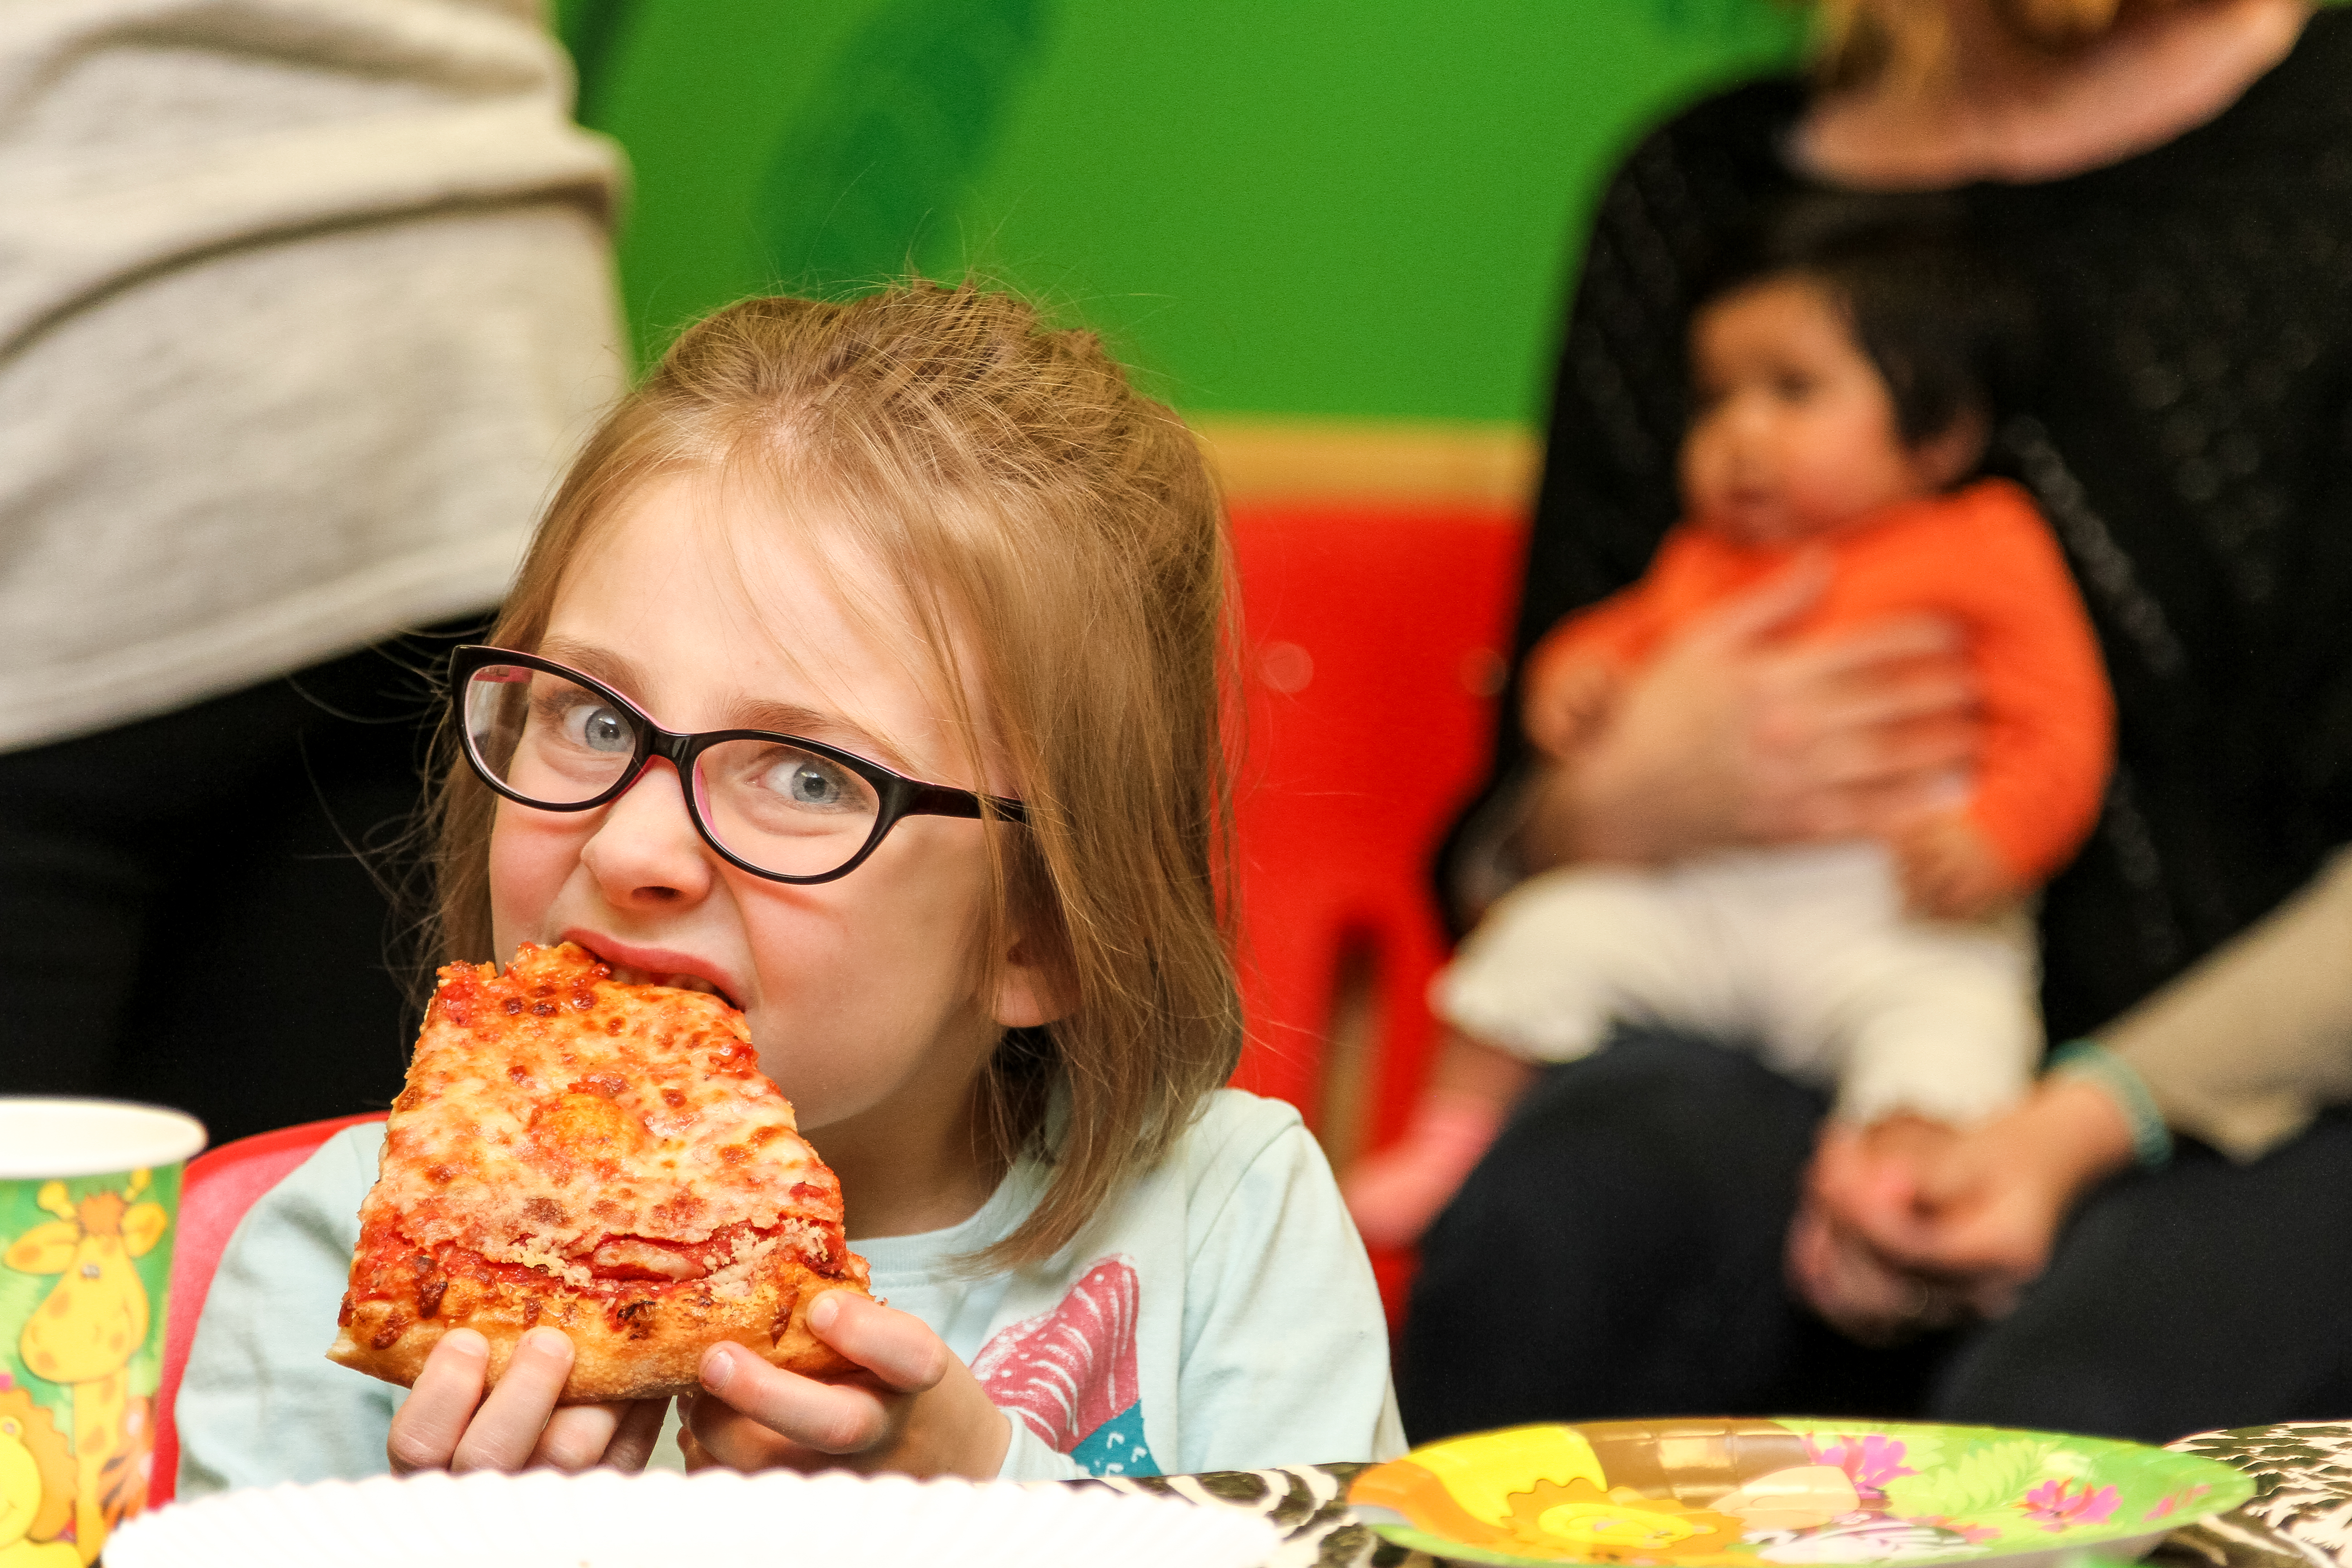 Host your child's party at Jungle Joe's